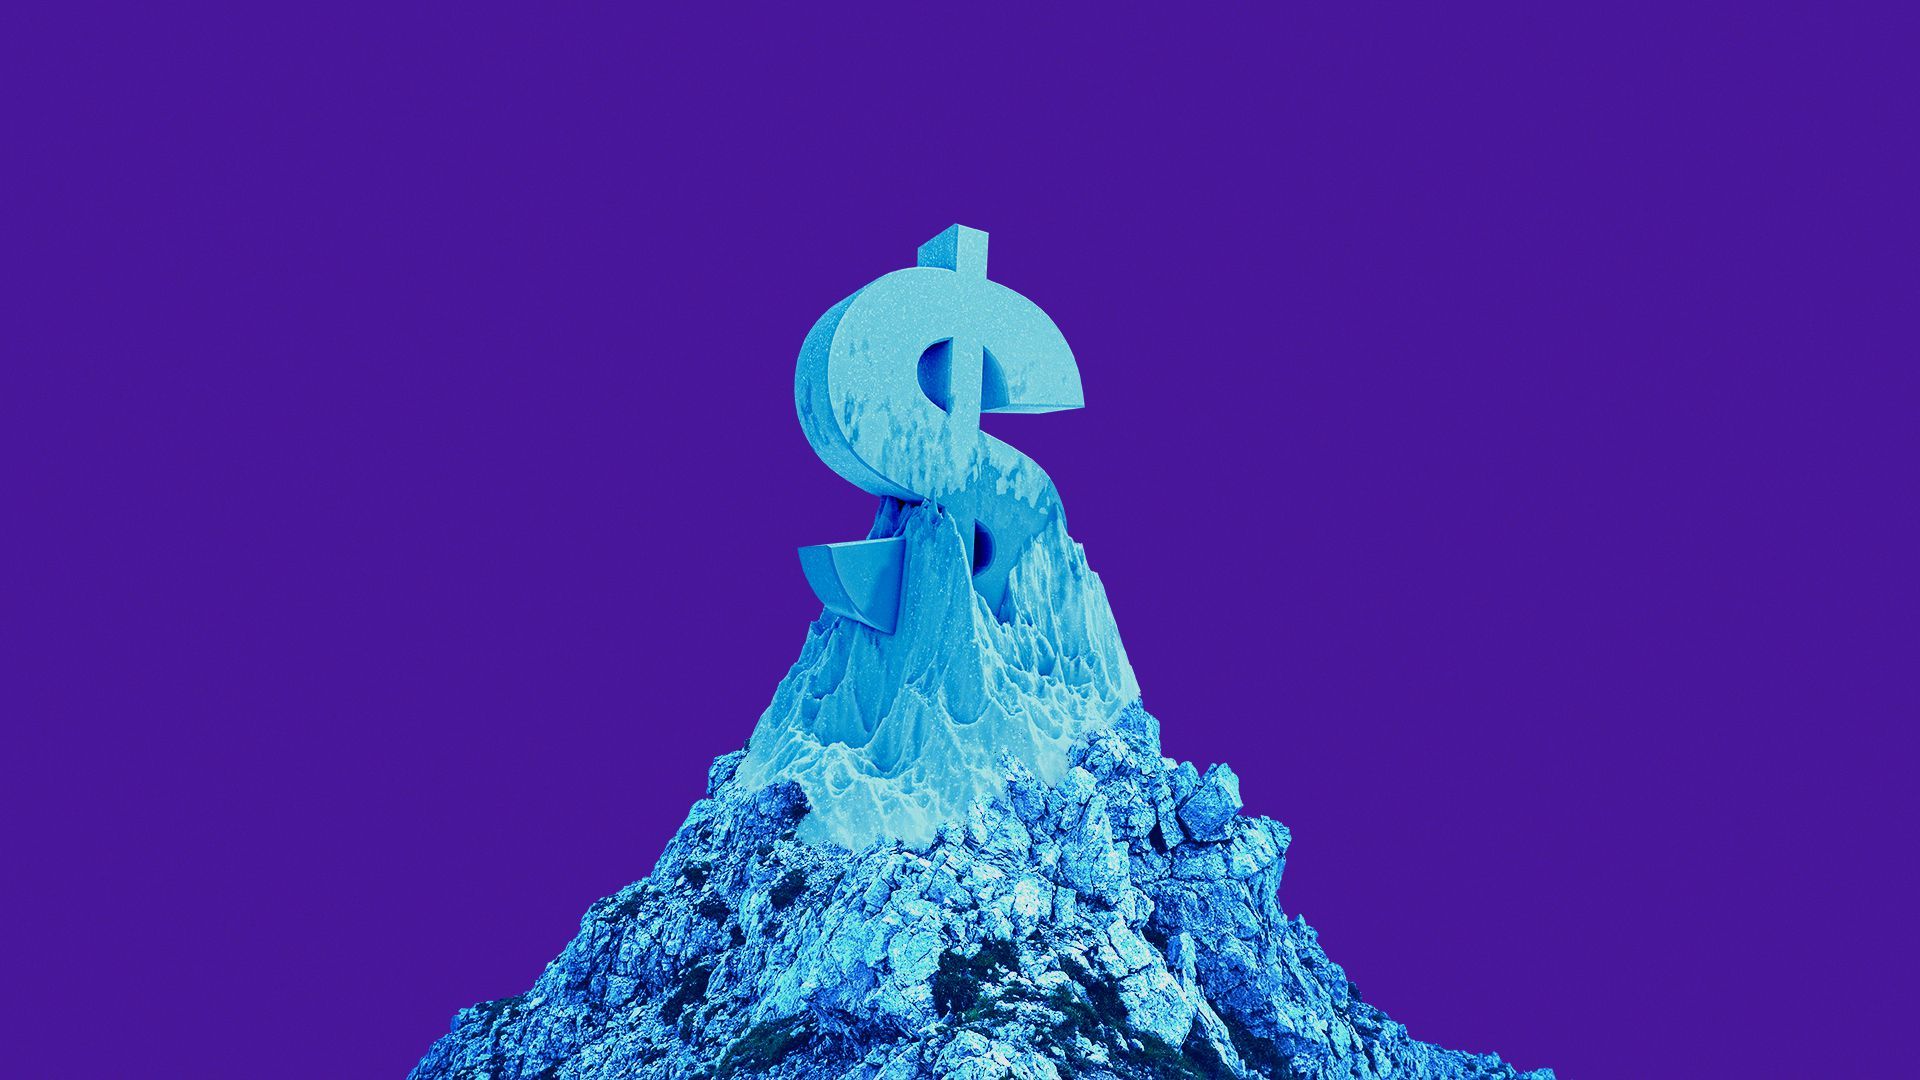 Illustration of a blue mountain with dollar sign made of ice on top.